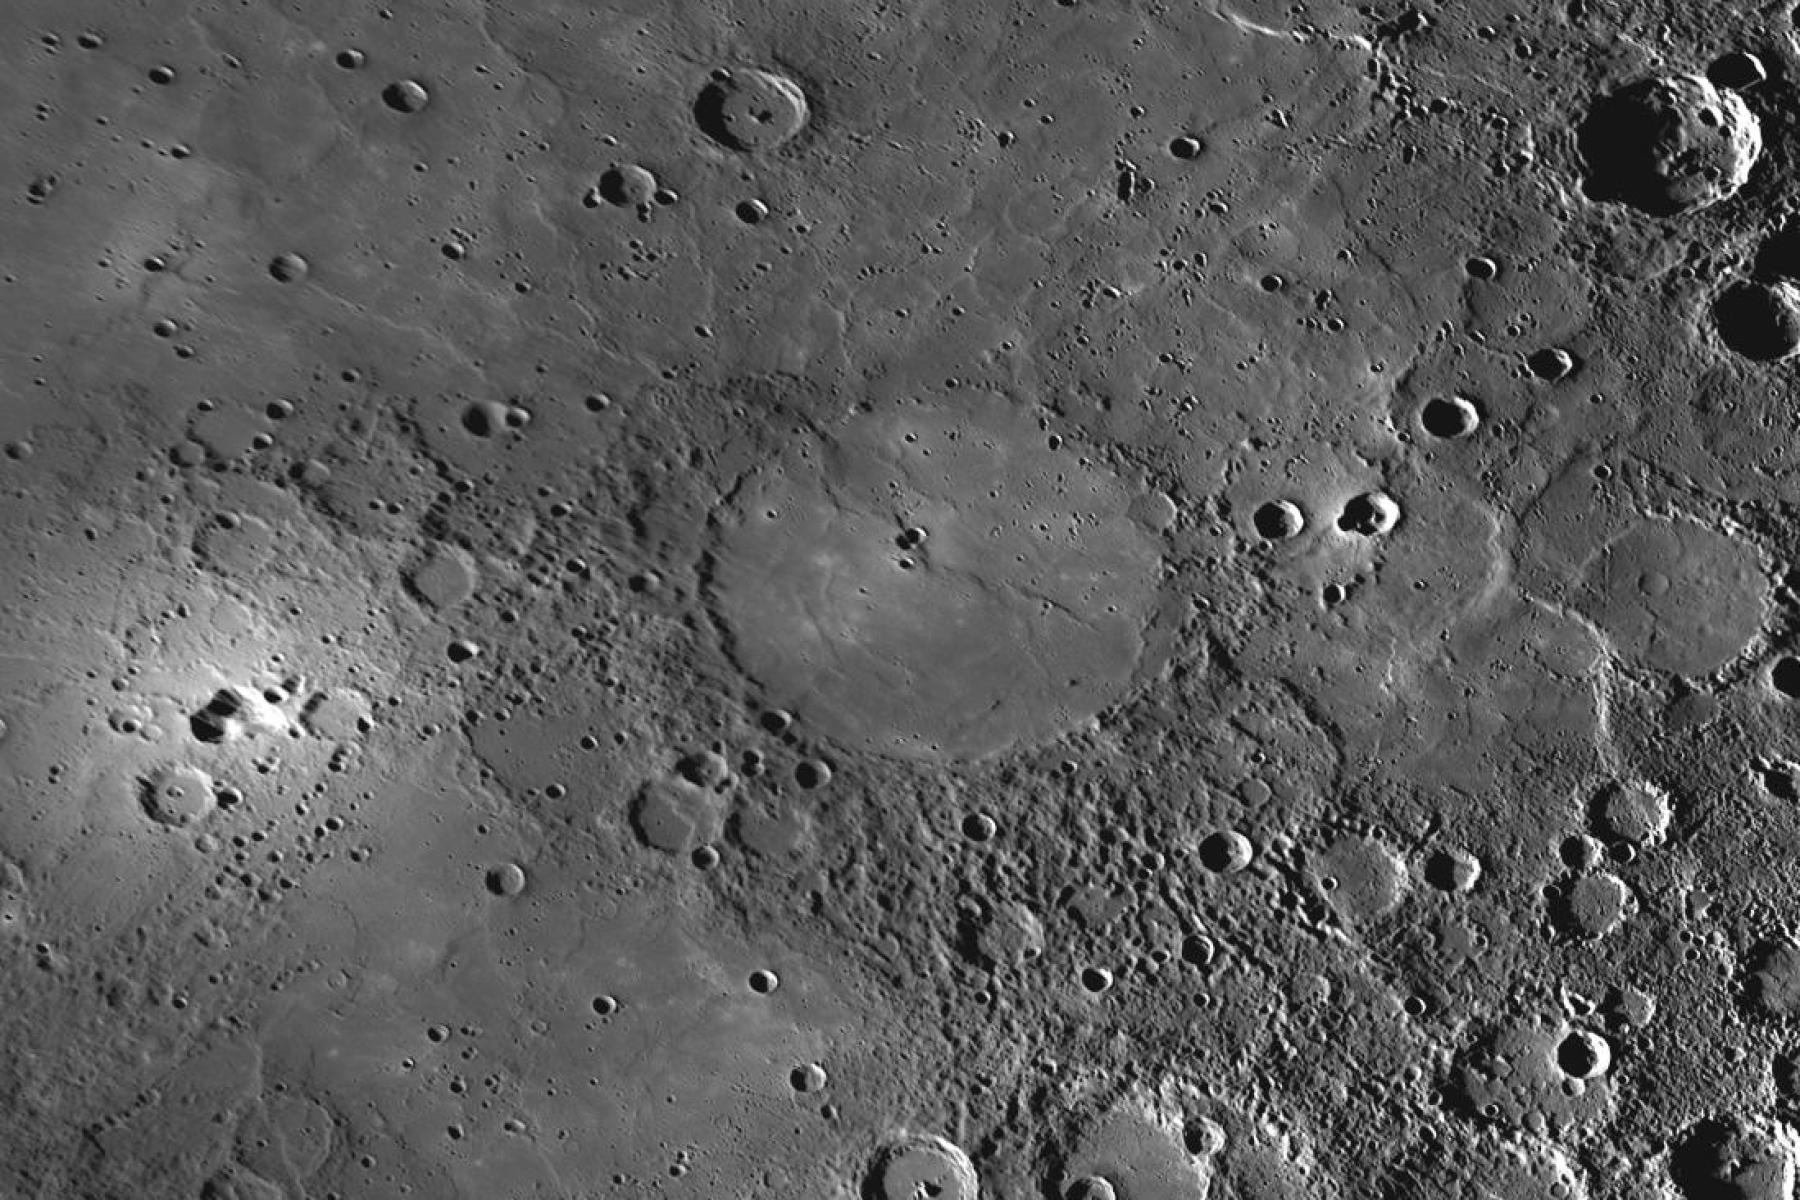 Scientific image of the Copland impact crater on Mercury